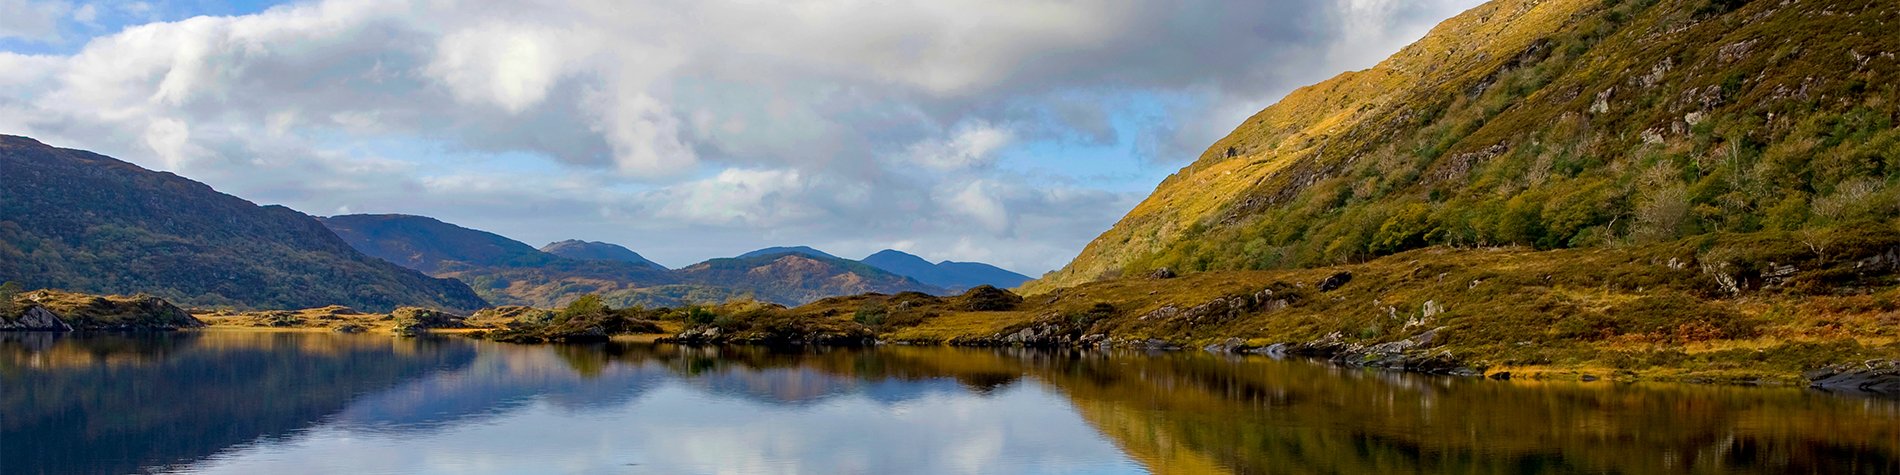 Cork's mountains reflected on water - Day Trips to Take Your Group On